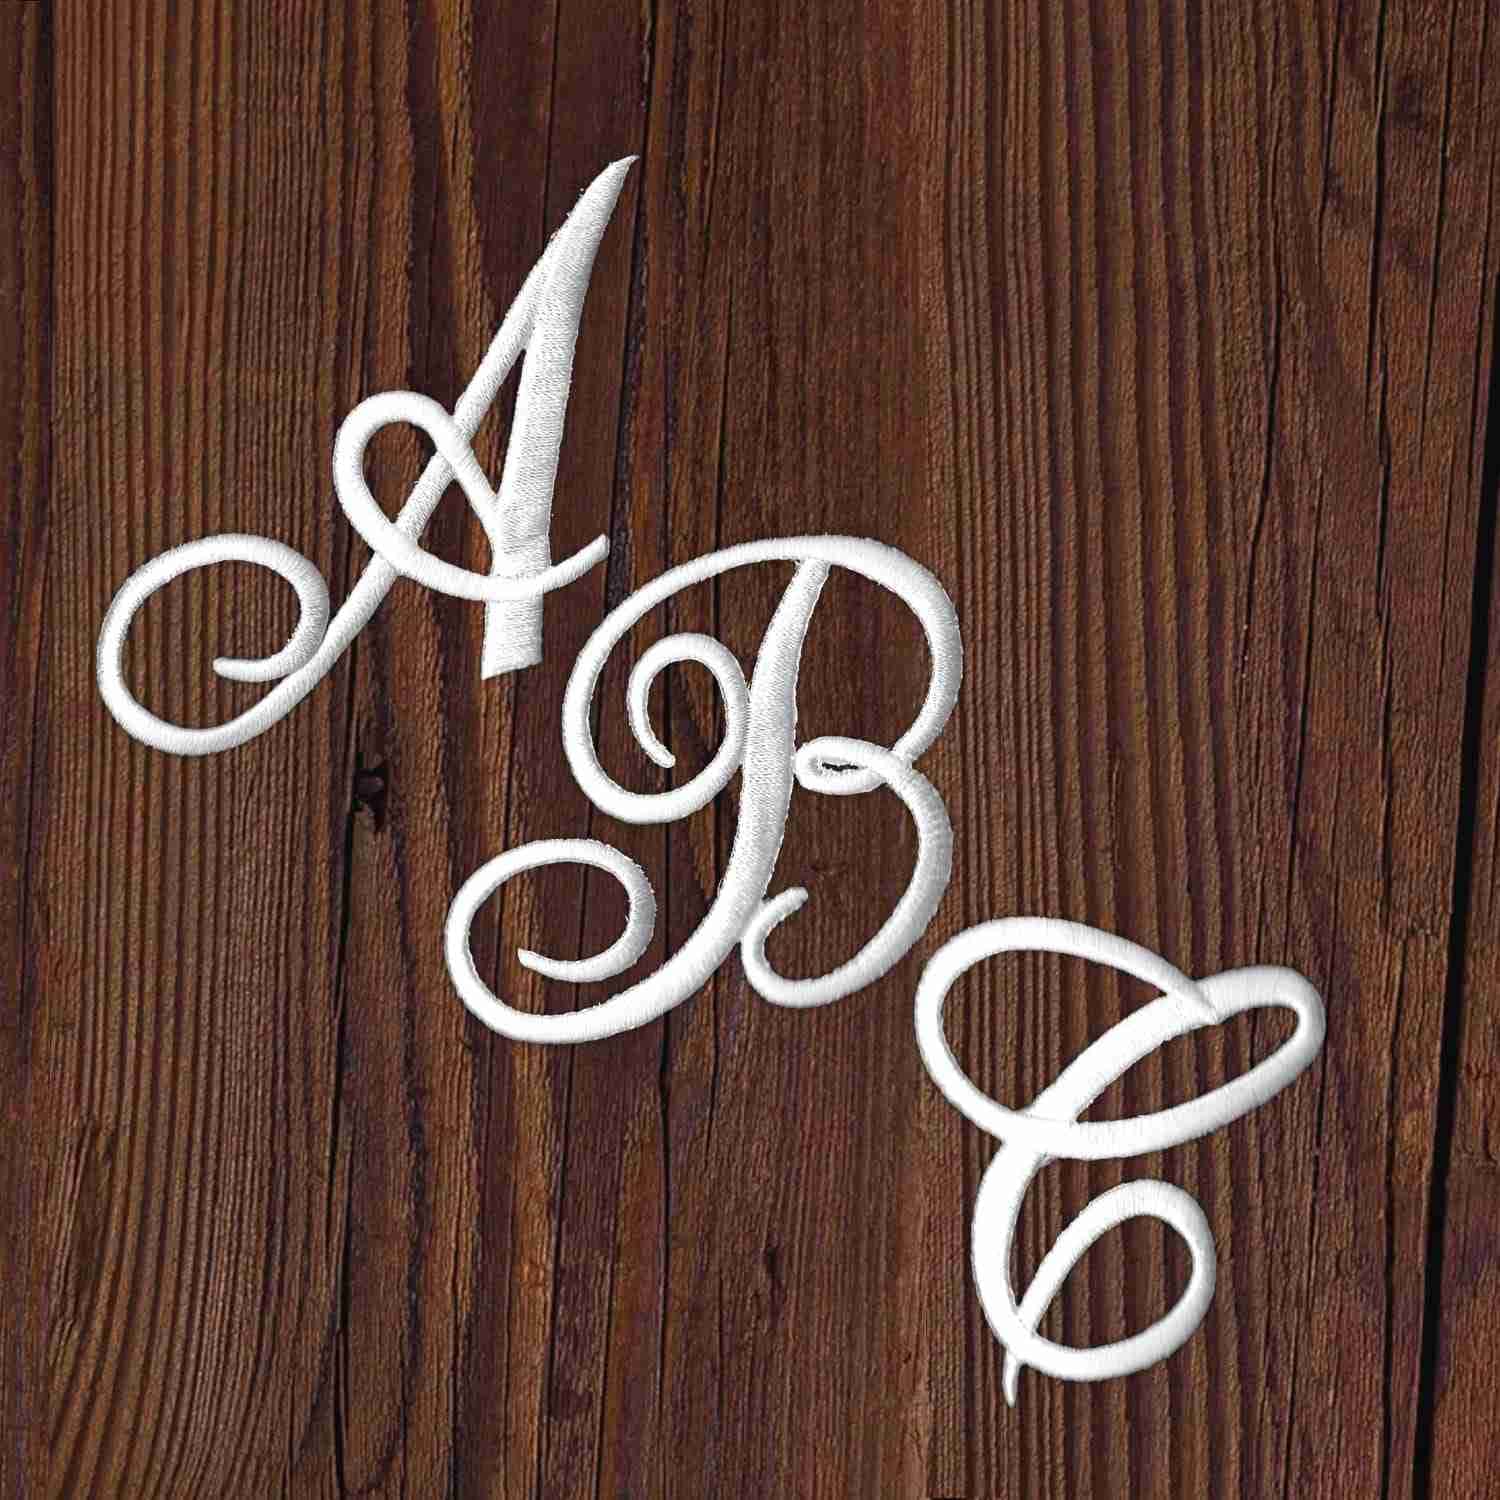  White Iron On Letters for Fabric & Clothing (208 Pieces) Iron  On Letters for Christmas Stockings, 1.5 Cursive Iron On Lettering & Small  Iron On Letters (White)